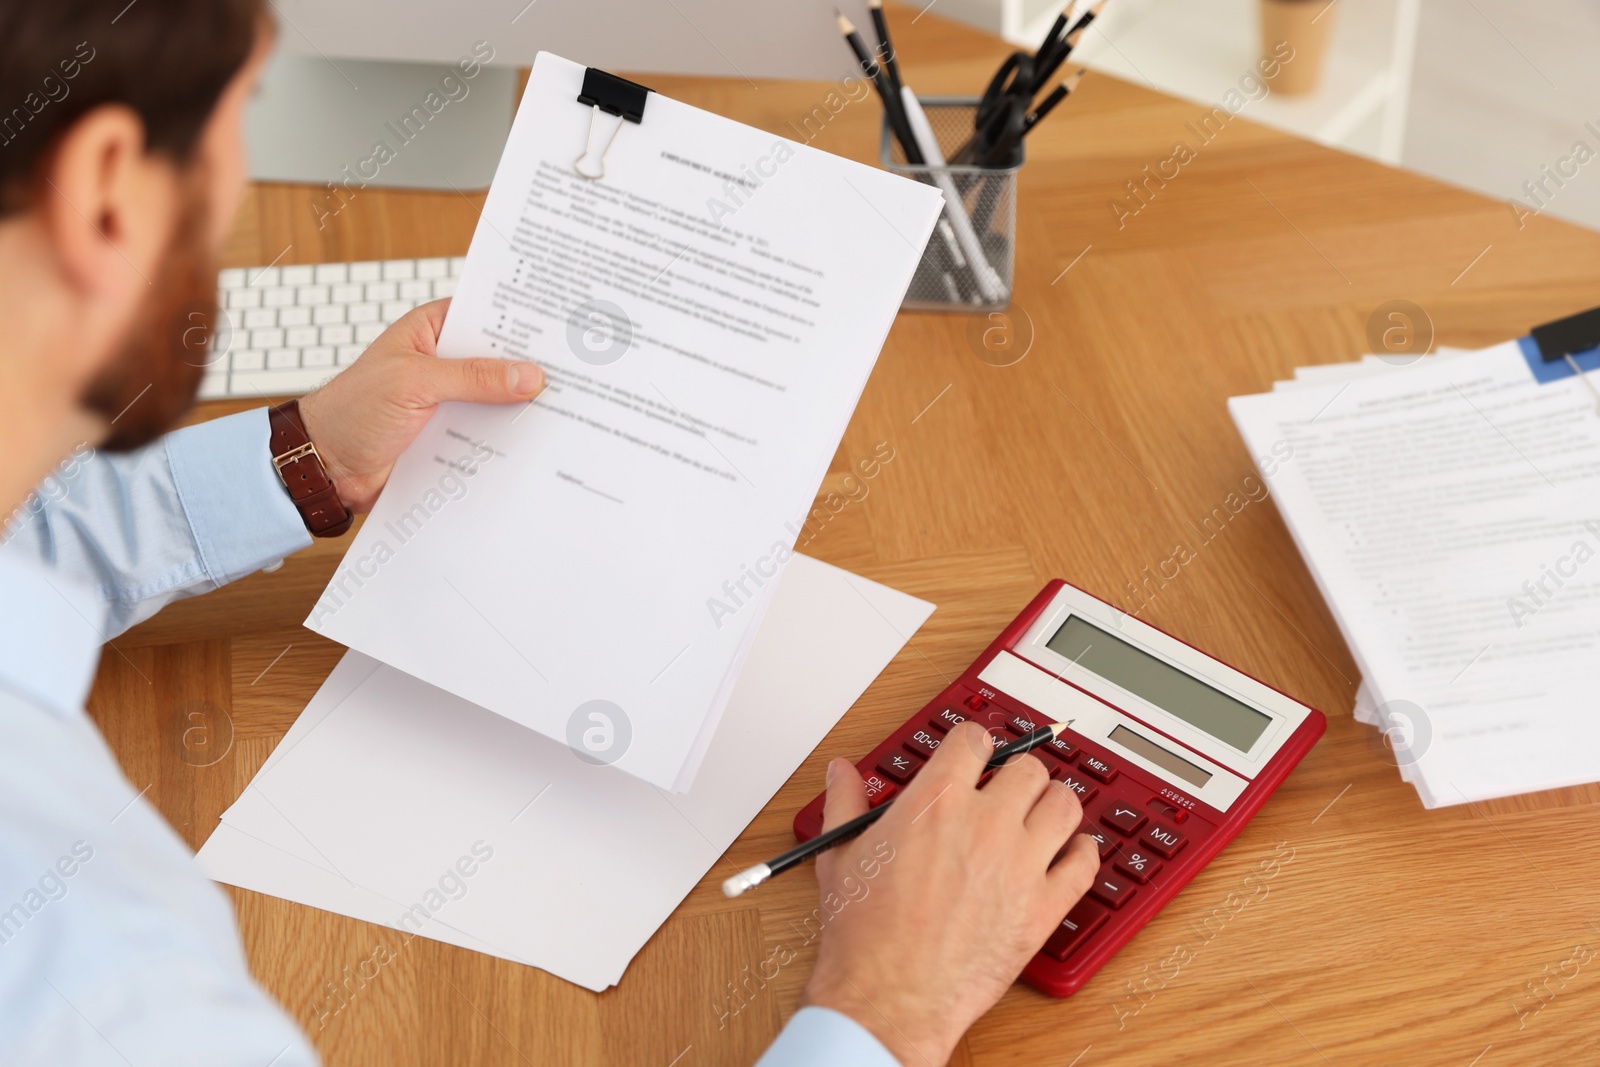 Photo of Man working with documents and using calculator at wooden table in office, above view